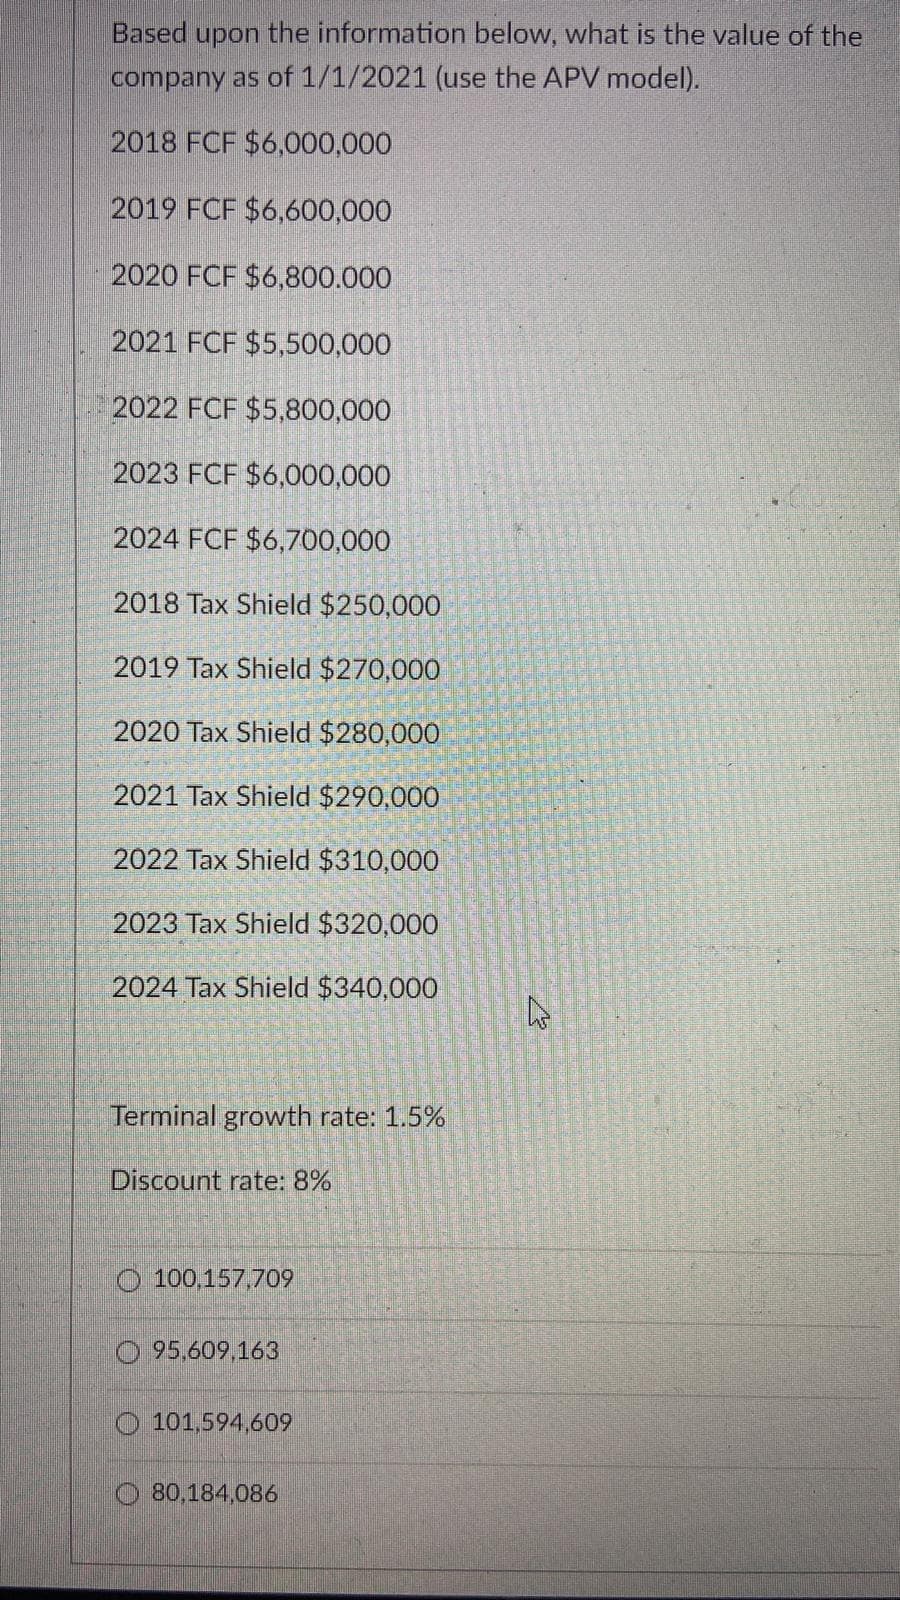 Based upon the information below, what is the value of the
company as of 1/1/2021 (use the APV model).
2018 FCF $6,000,000
2019 FCF $6,600,000
2020 FCF $6,800.000
2021 FCF $5,500,000
2022 FCF $5,800,000
2023 FCF $6,000,000
2024 FCF $6,700,000
2018 Tax Shield $250,000
2019 Tax Shield $270,000
2020 Tax Shield $280,000
2021 Tax Shield $290,000
2022 Tax Shield $310,000
2023 Tax Shield $320,000
2024 Tax Shield $340,000
Terminal growth rate: 1.5%
Discount rate: 8%
100,157,709
95,609,163
101,594,609
80,184,086